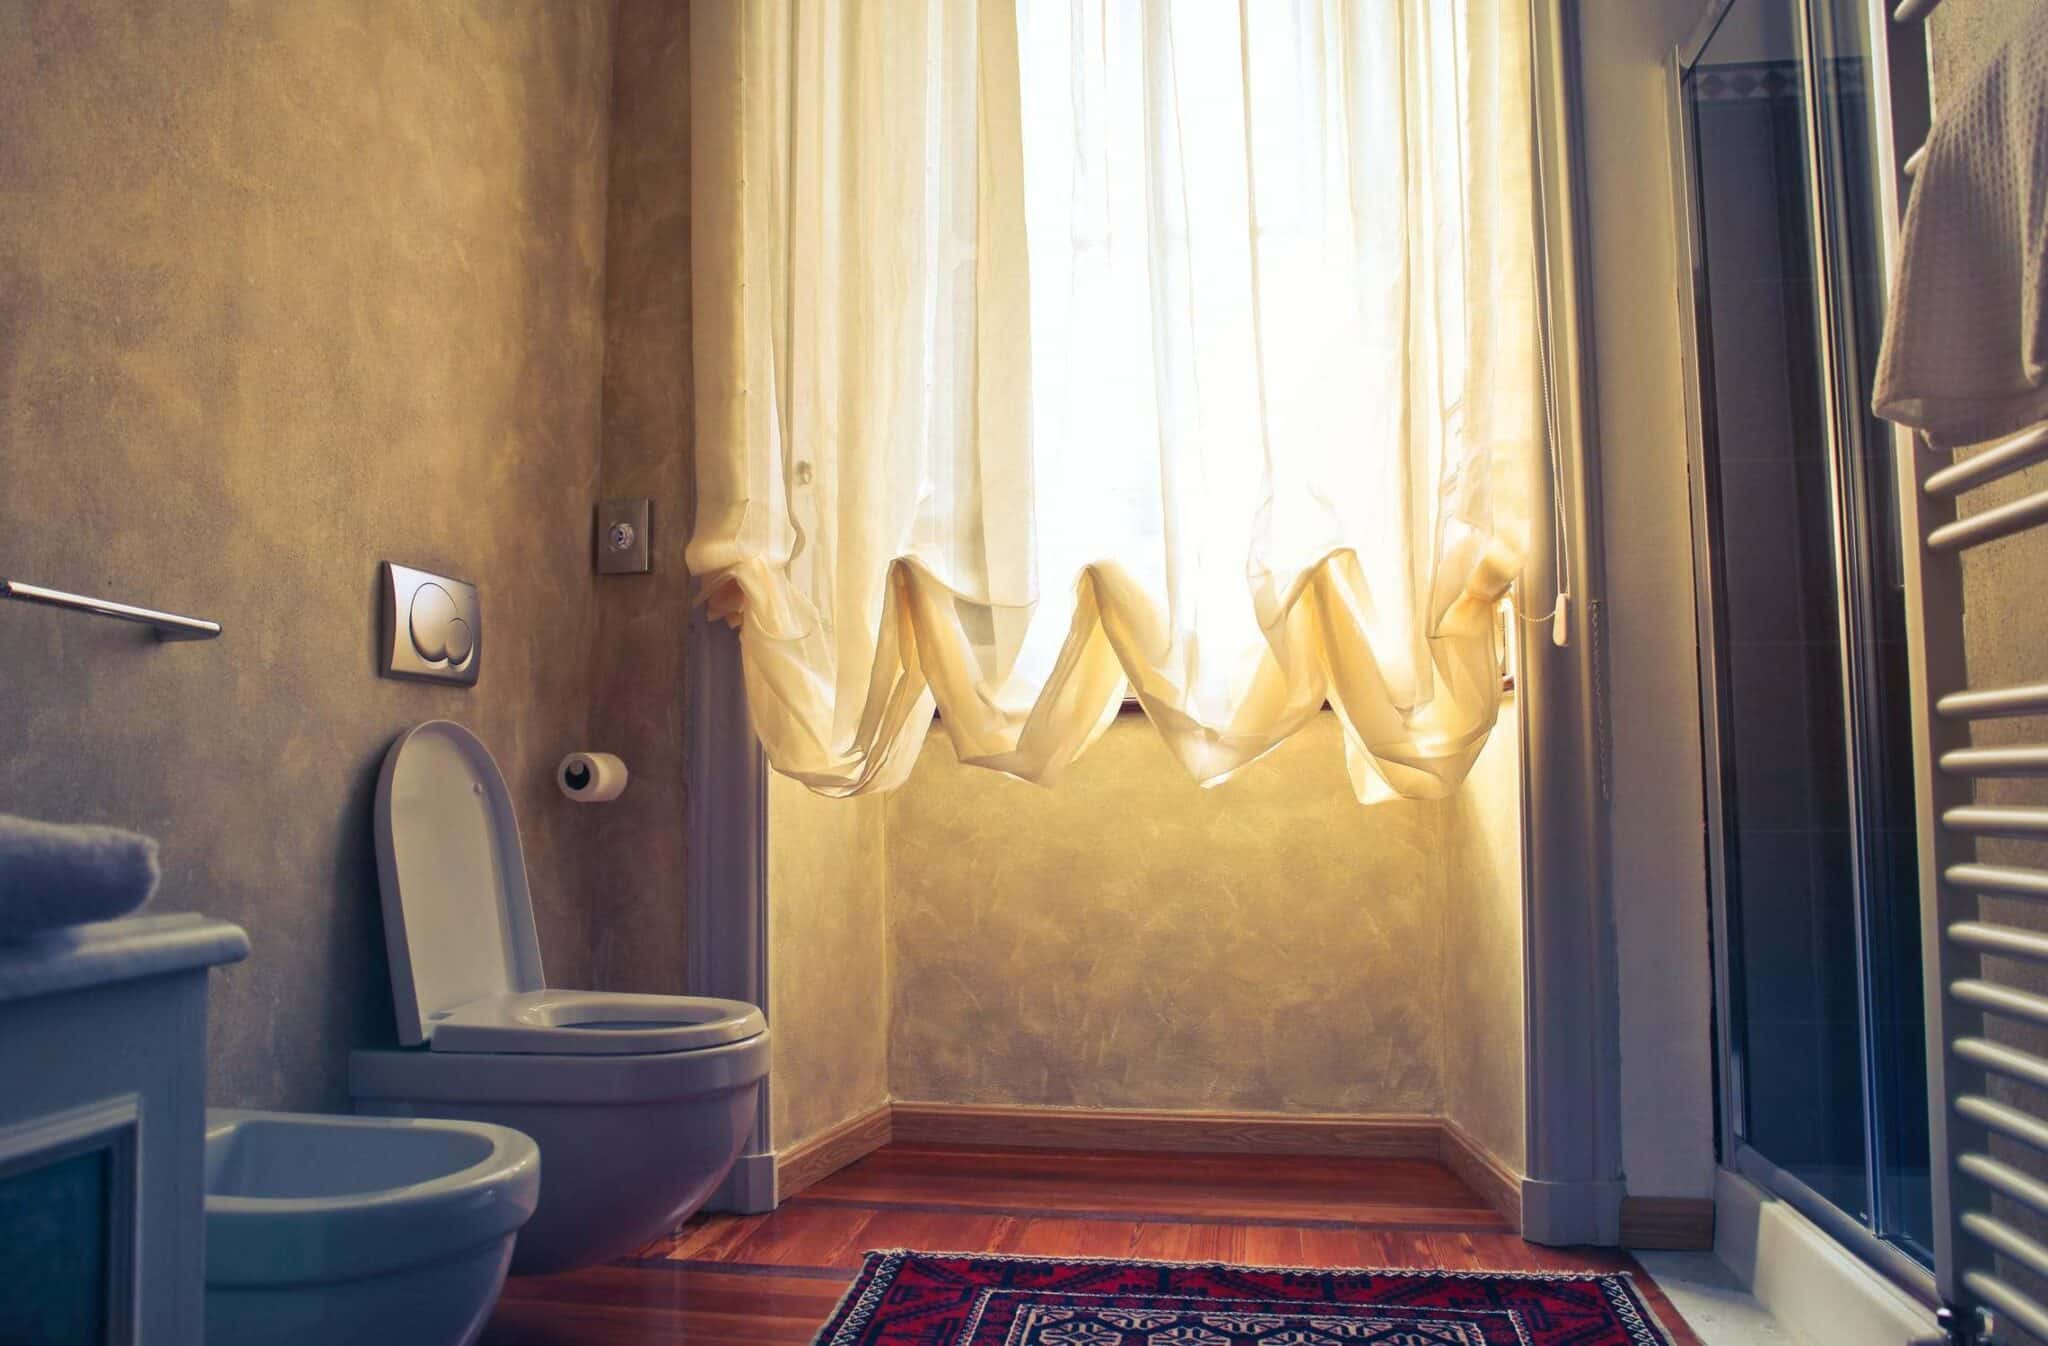 Bathroom Renovation Tips You Need Before Getting Started